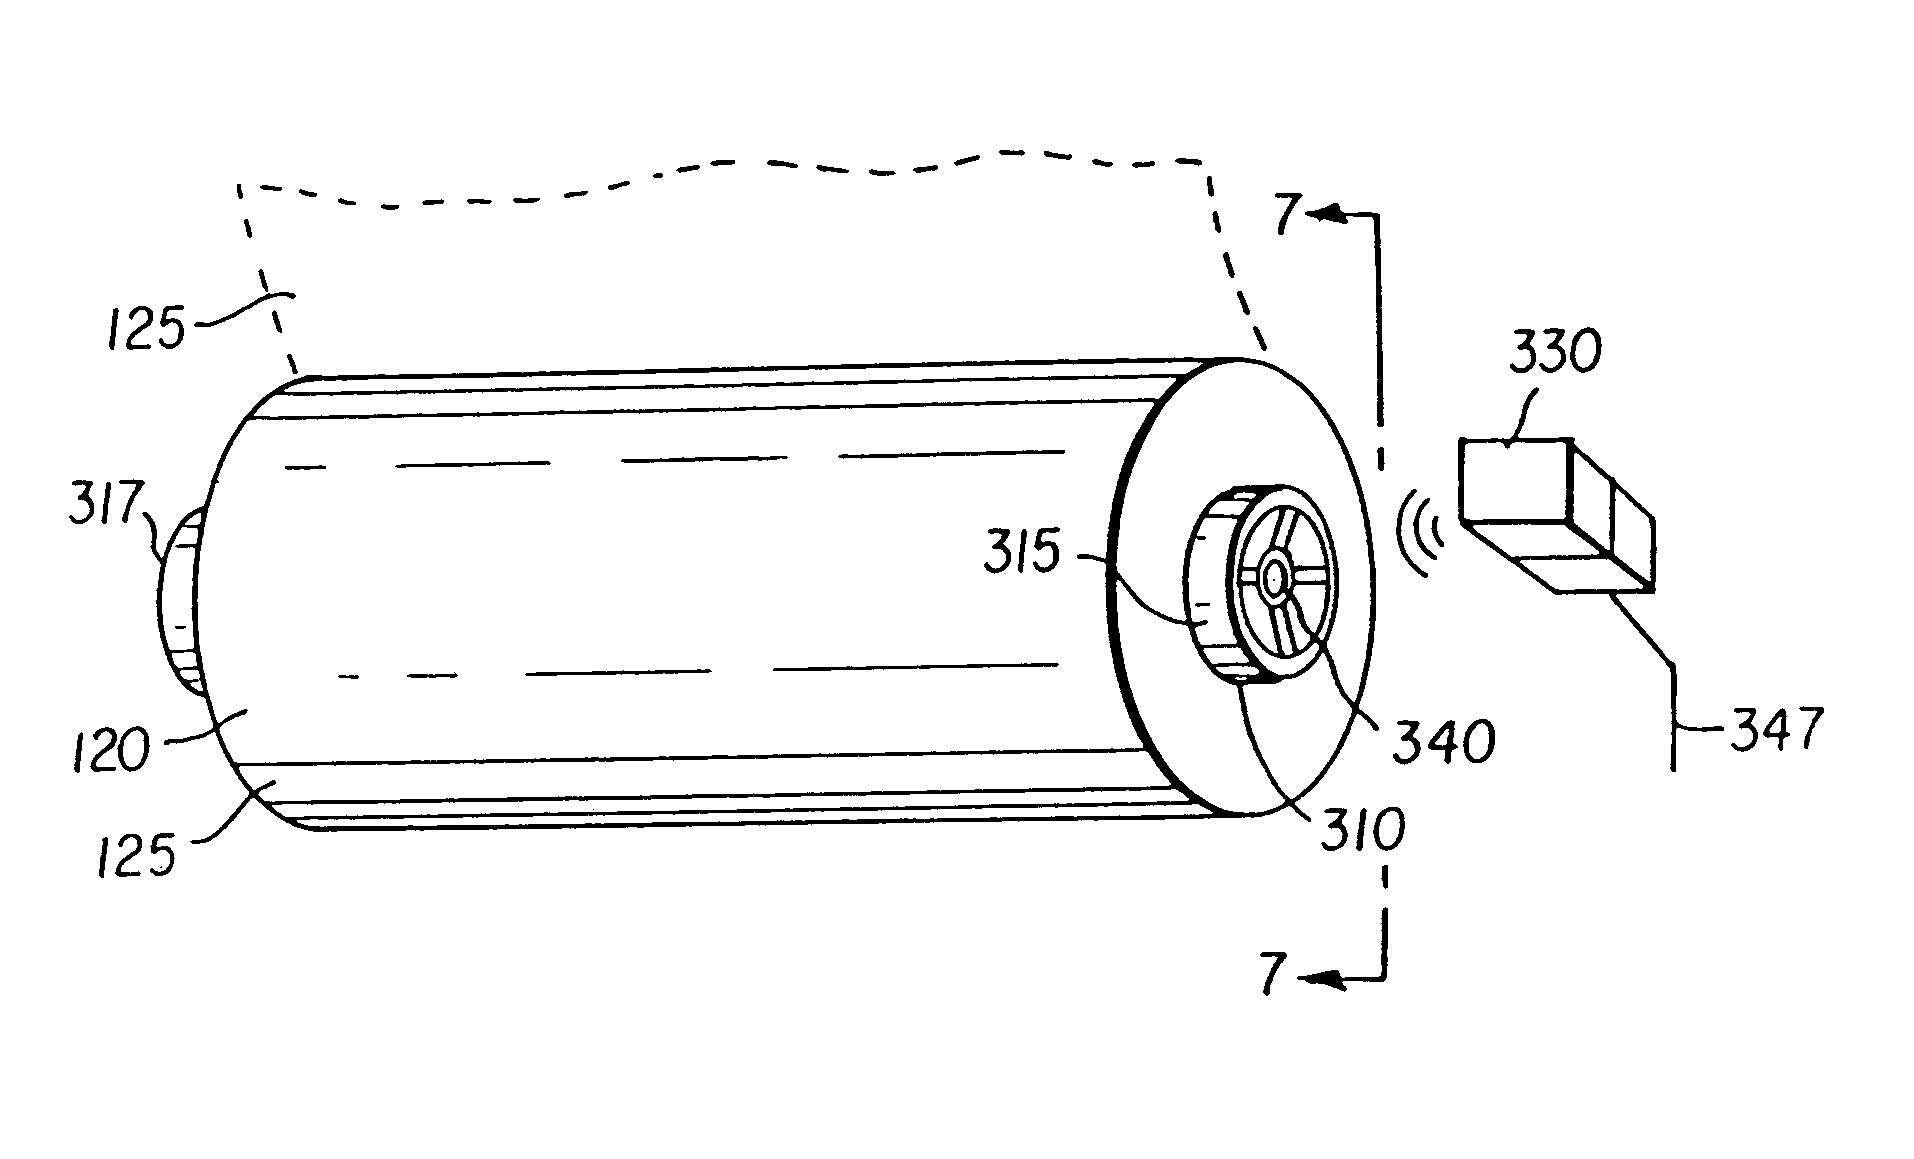 Printer media supply spool adapted to allow the printer to sense type of media, and method of assembling same